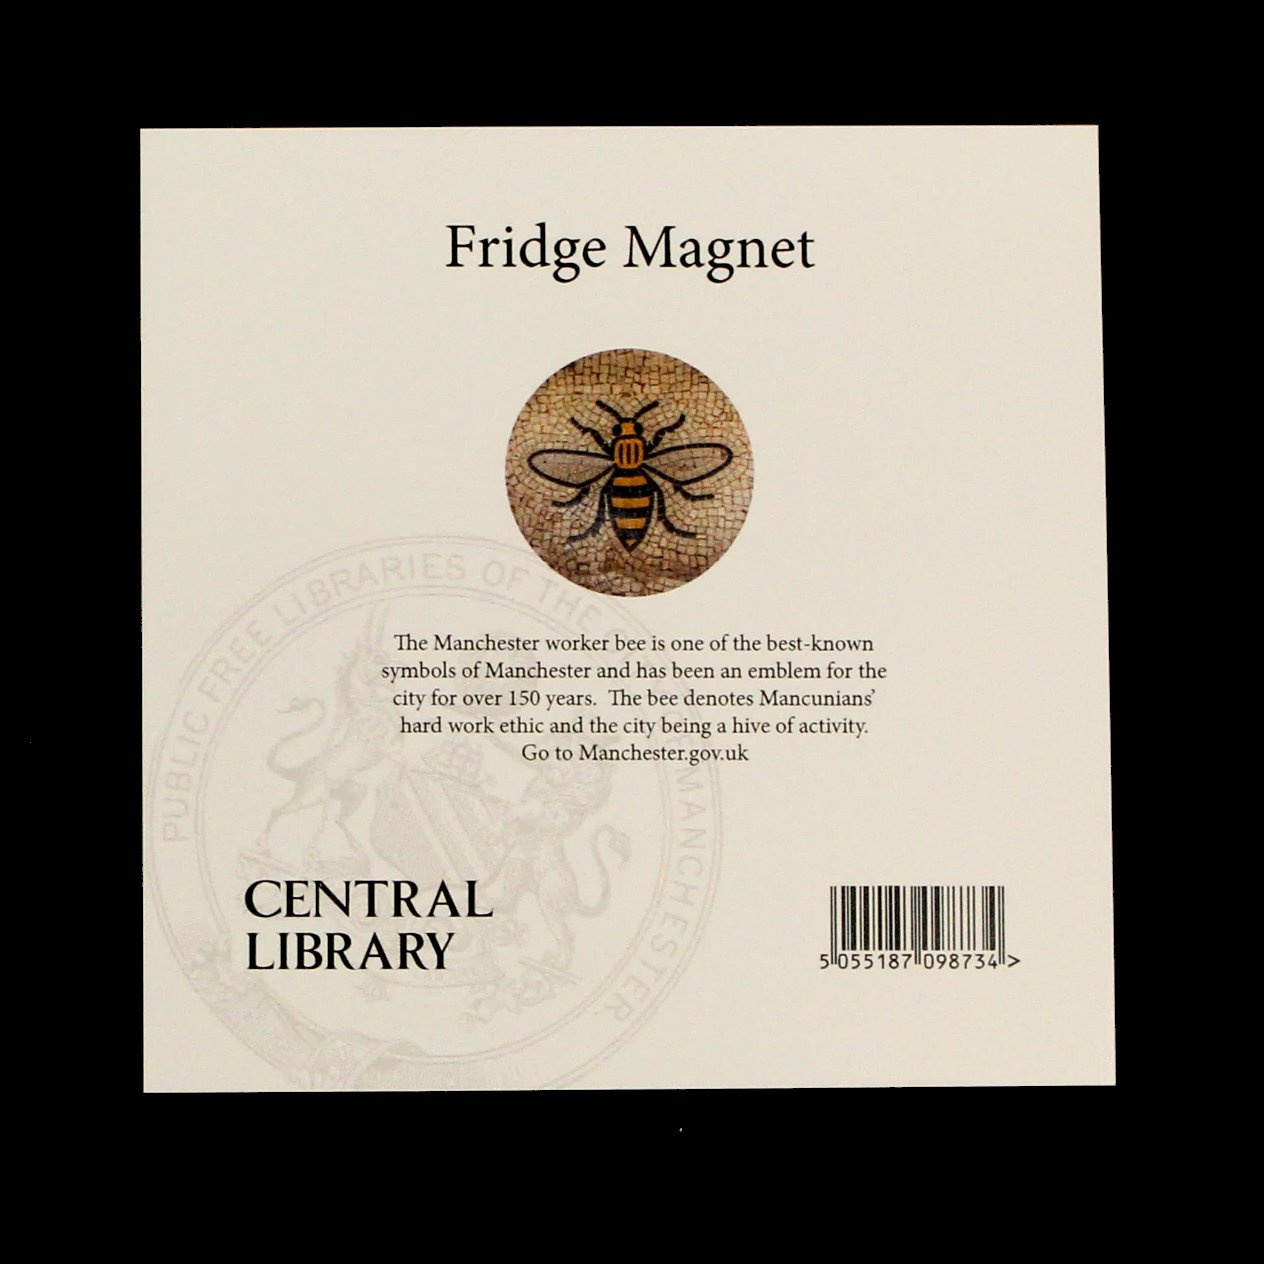 Rear of fridge magnet featuring image of the mosaic bee floor from Manchester Town Hall